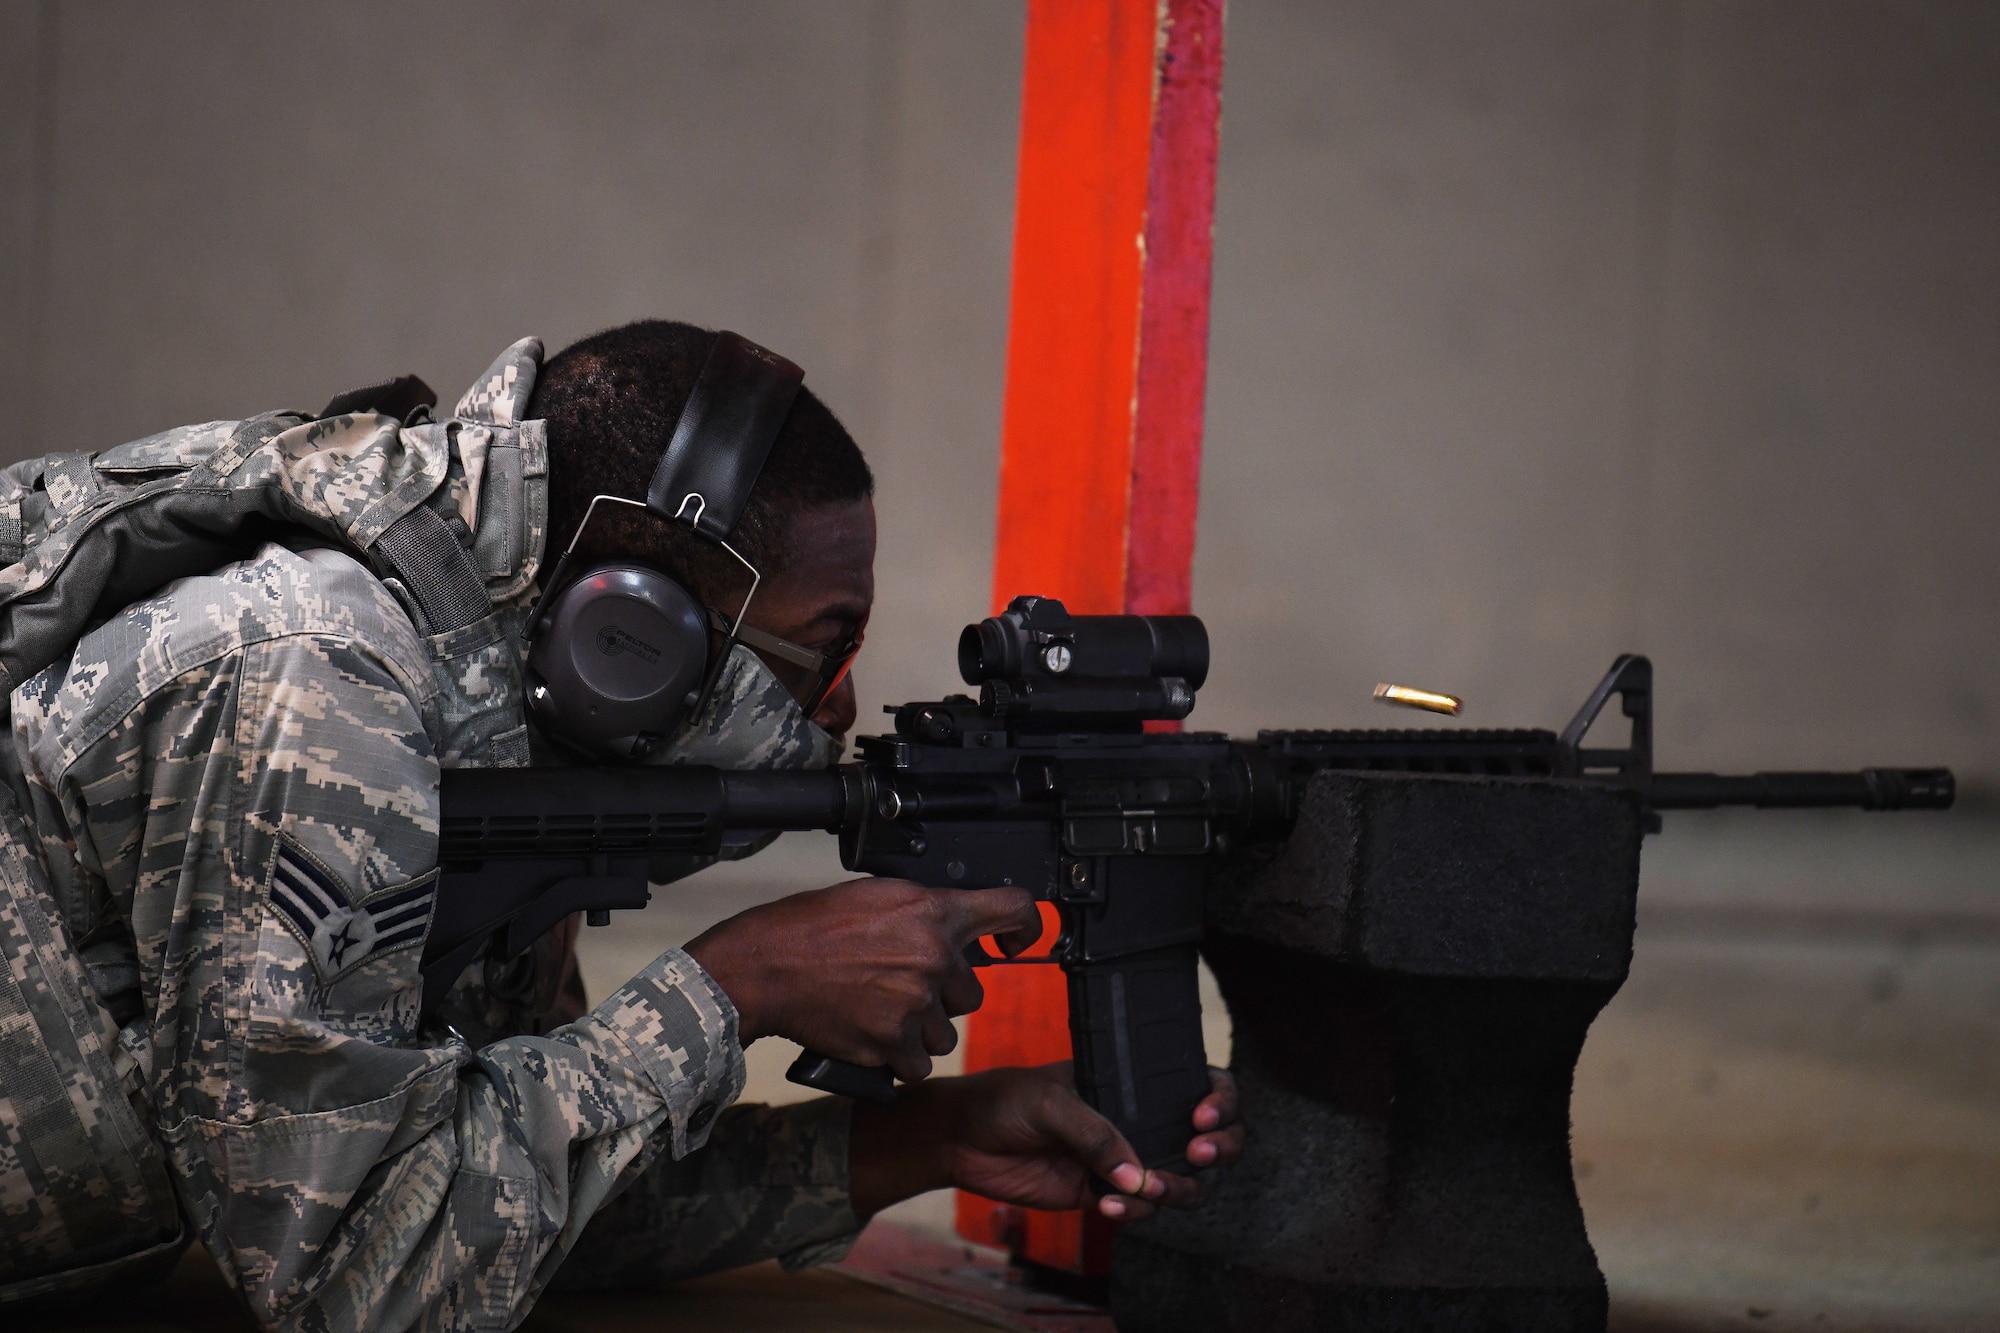 A security forces augmentee in training fires an M4 Carbine assault rifle during training at Royal Air Force Feltwell, England, April 17, 2020. The Security Forces Augmentee Program consists of a three-day course of classroom instructions and hands-on training. (U.S. Air Force photo by Senior Airman Shanice Williams-Jones)